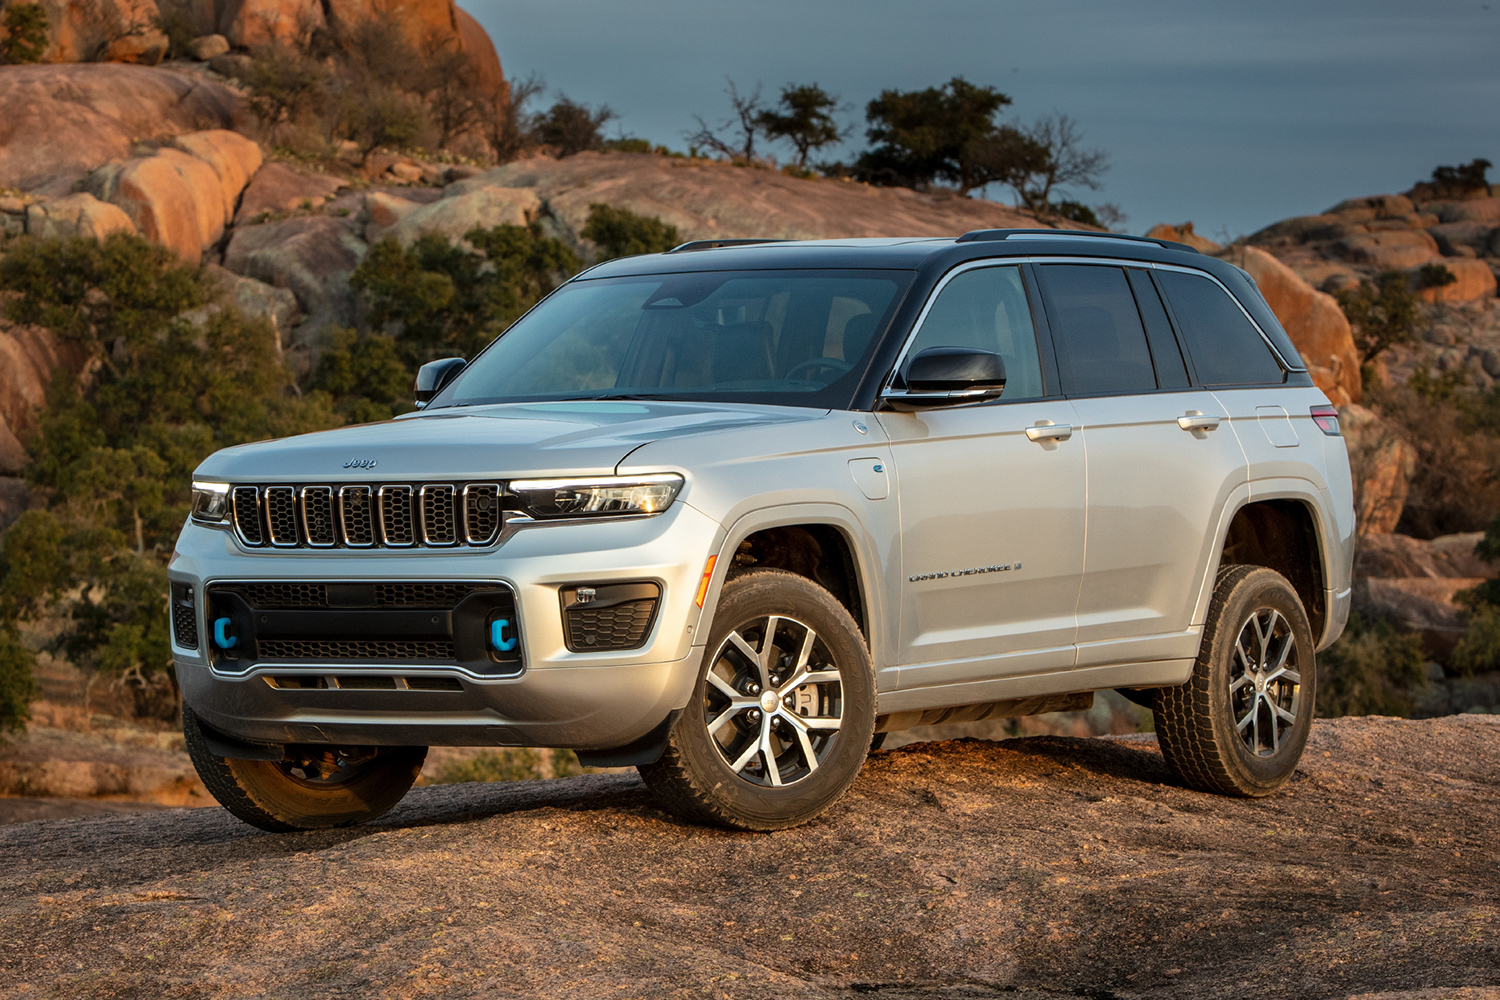 Review: Jeep Grand Cherokee 4xe, an Intro to Electrification